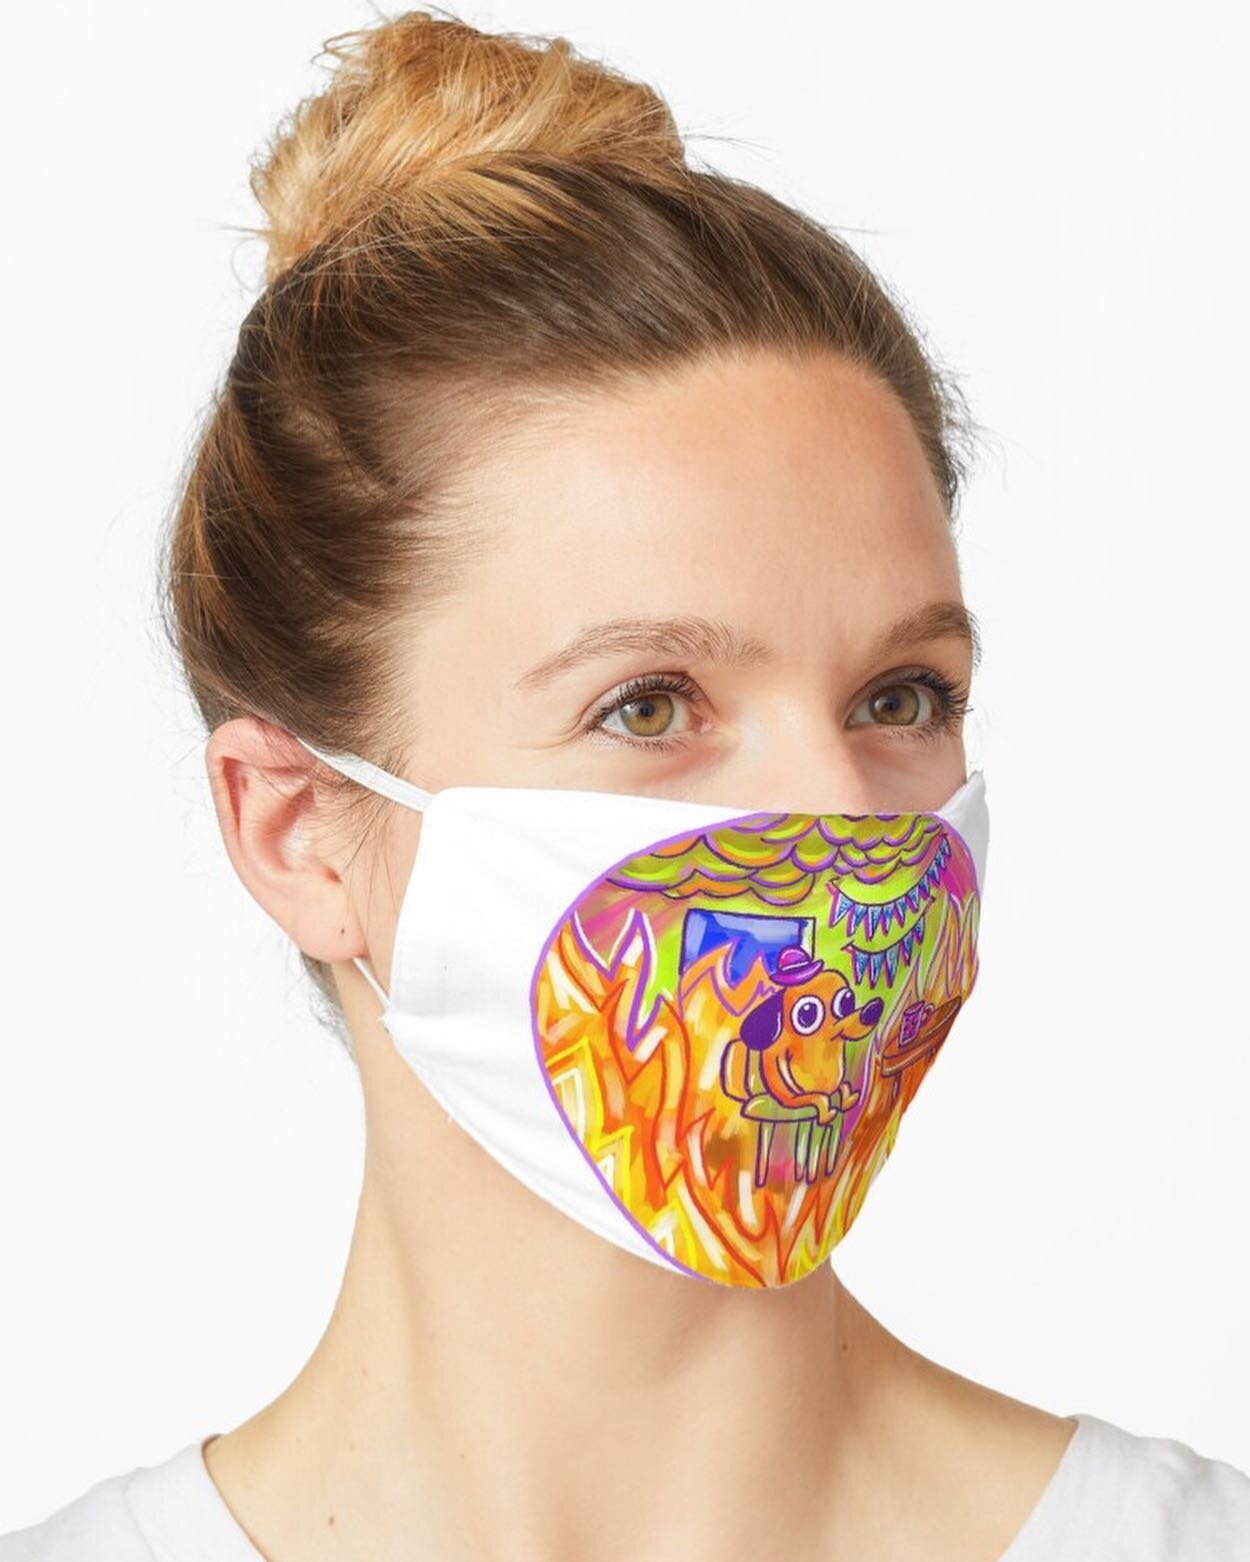 Finally added some of my designs to a Redbubble! Here&rsquo;s what the masks look like and I&rsquo;m kind of obsessed haha. 💖💖💖 link in bio! #supportsmallbusiness #supportlocal #masksforsale #redbubbleartist #neworleansartist